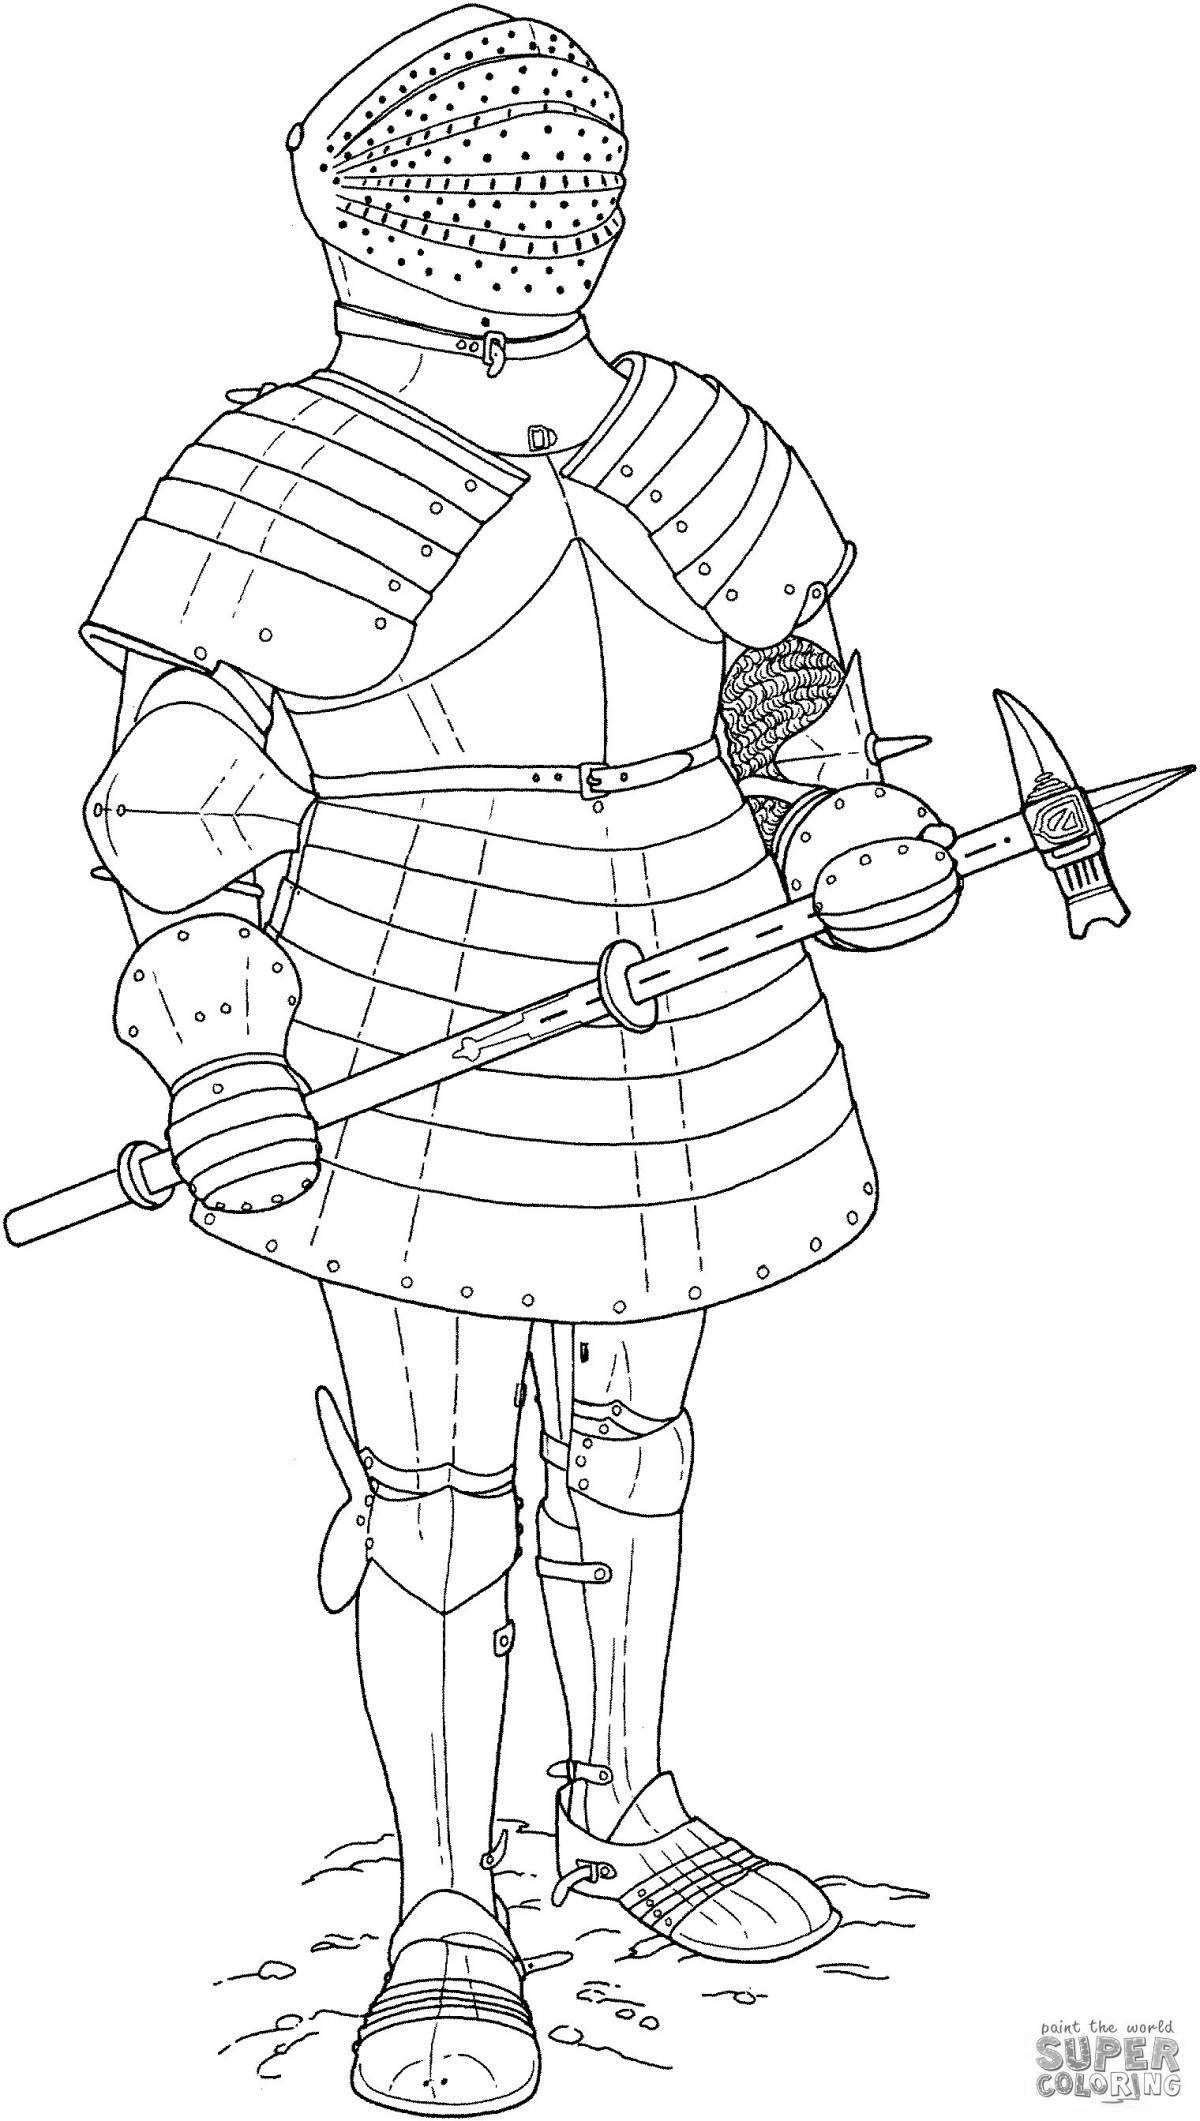 Glorious coloring book knight in armor